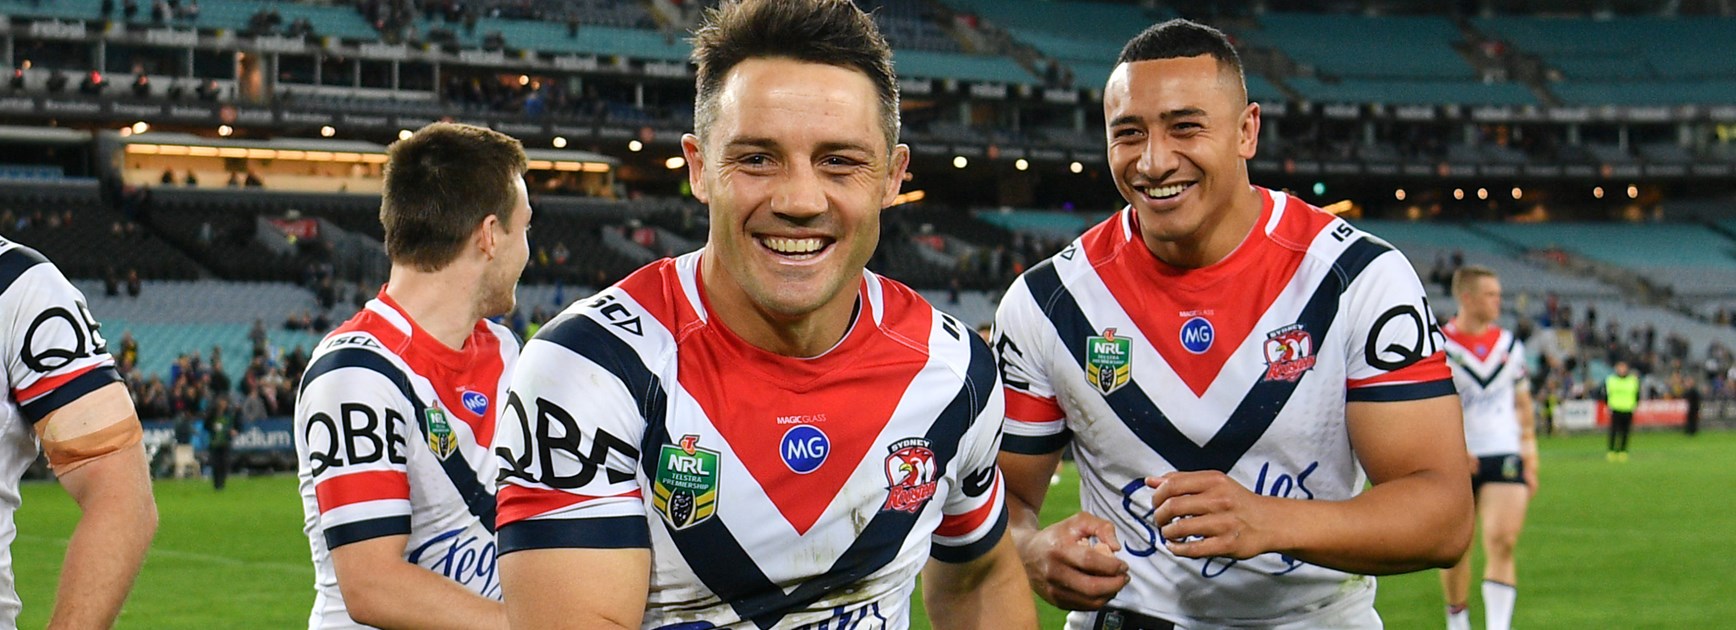 Cooper Cronk and Siosiua Taukeiaho after a win.